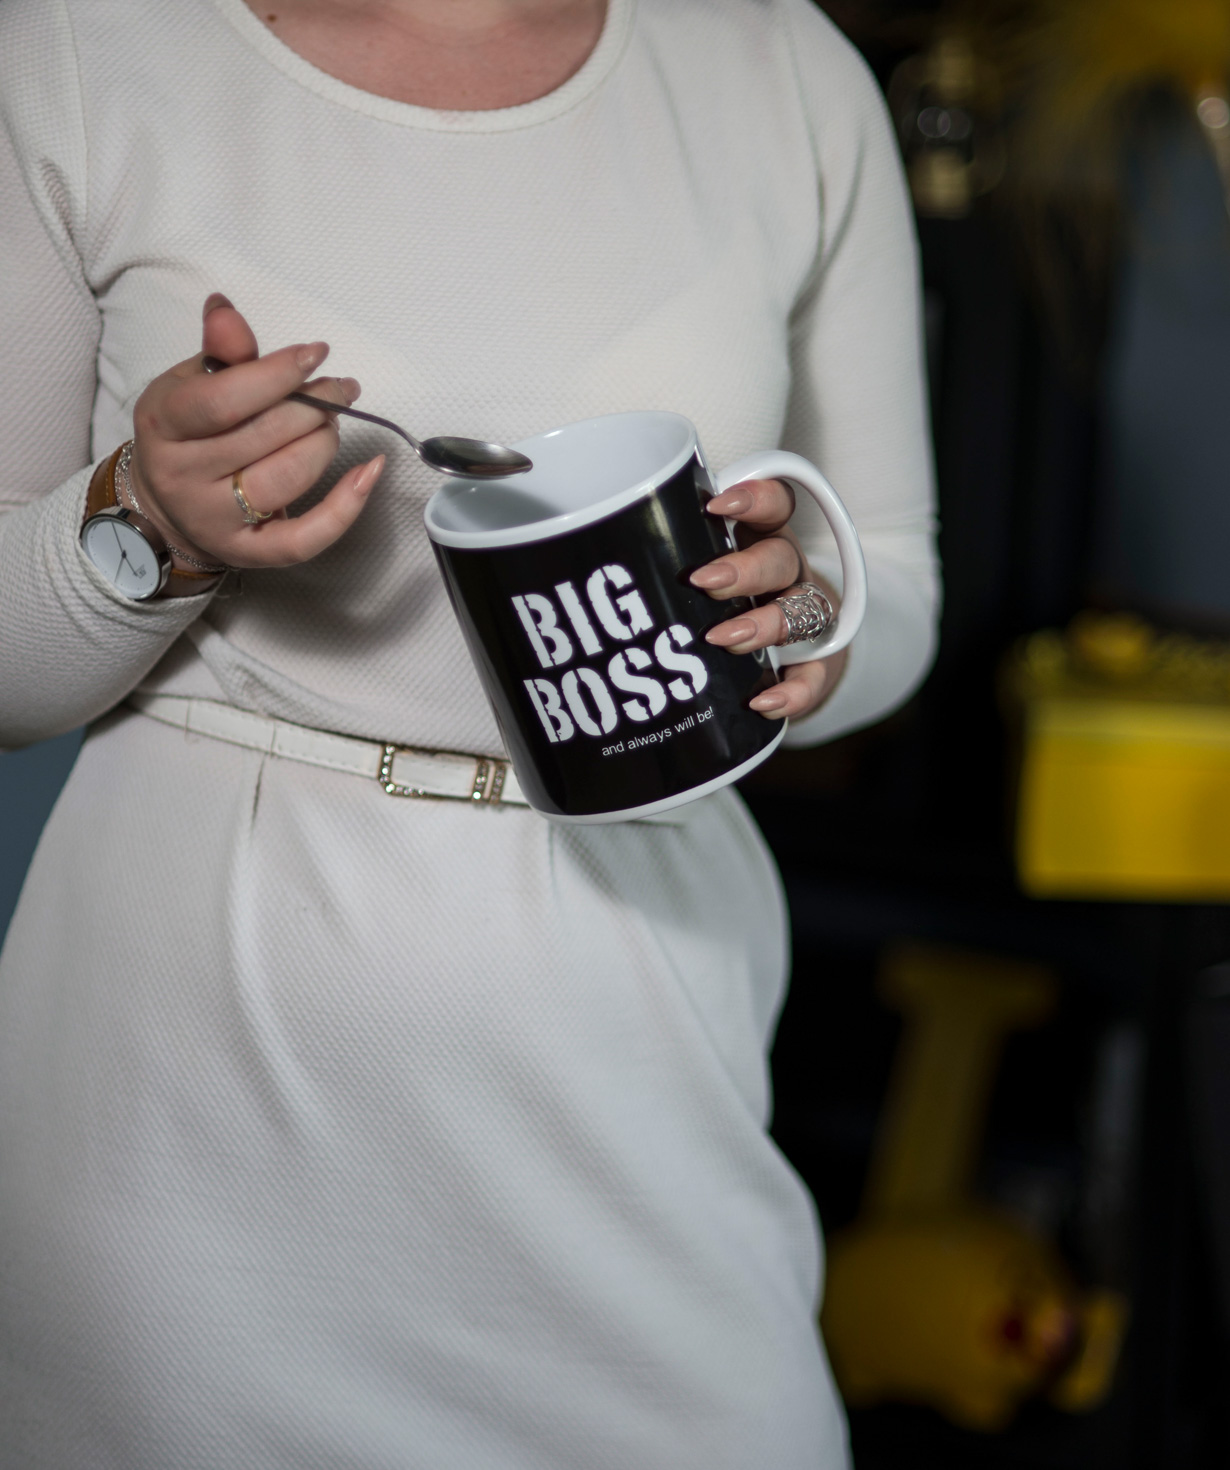 Cup `Creative Gifts` Big Boss giant